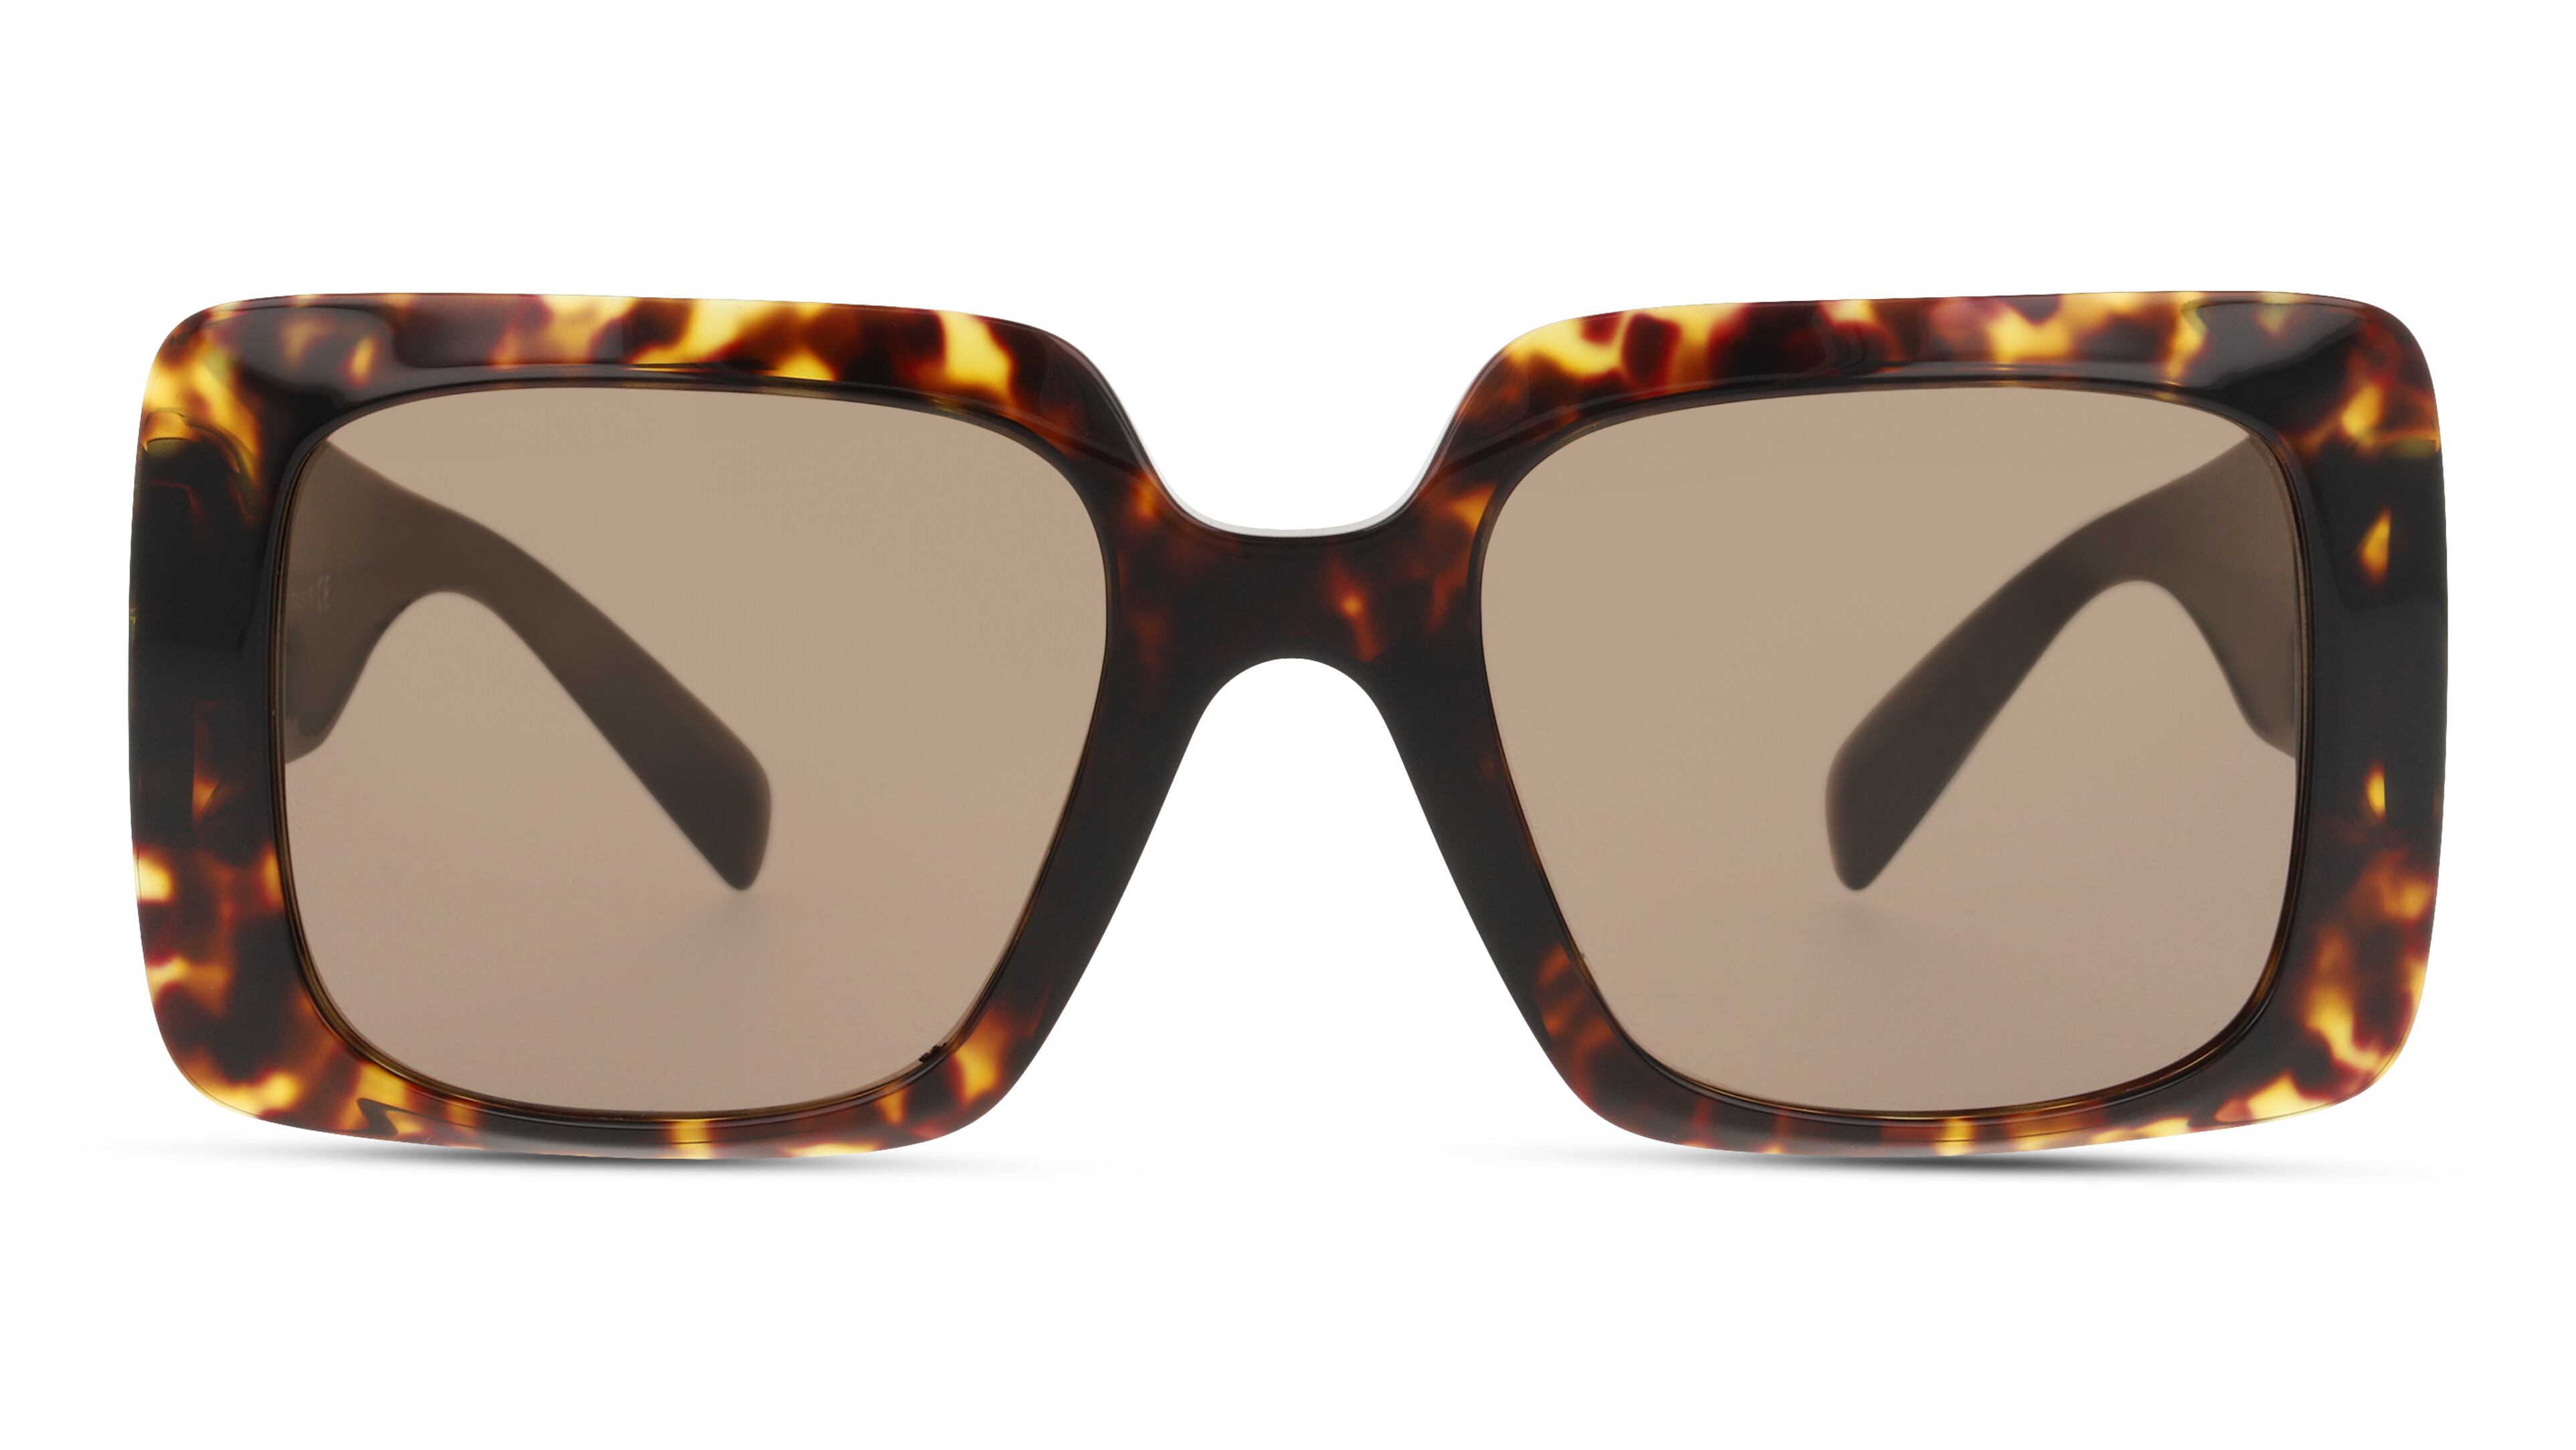 [products.image.front] Versace 0VE4405 108/73 Sonnenbrille